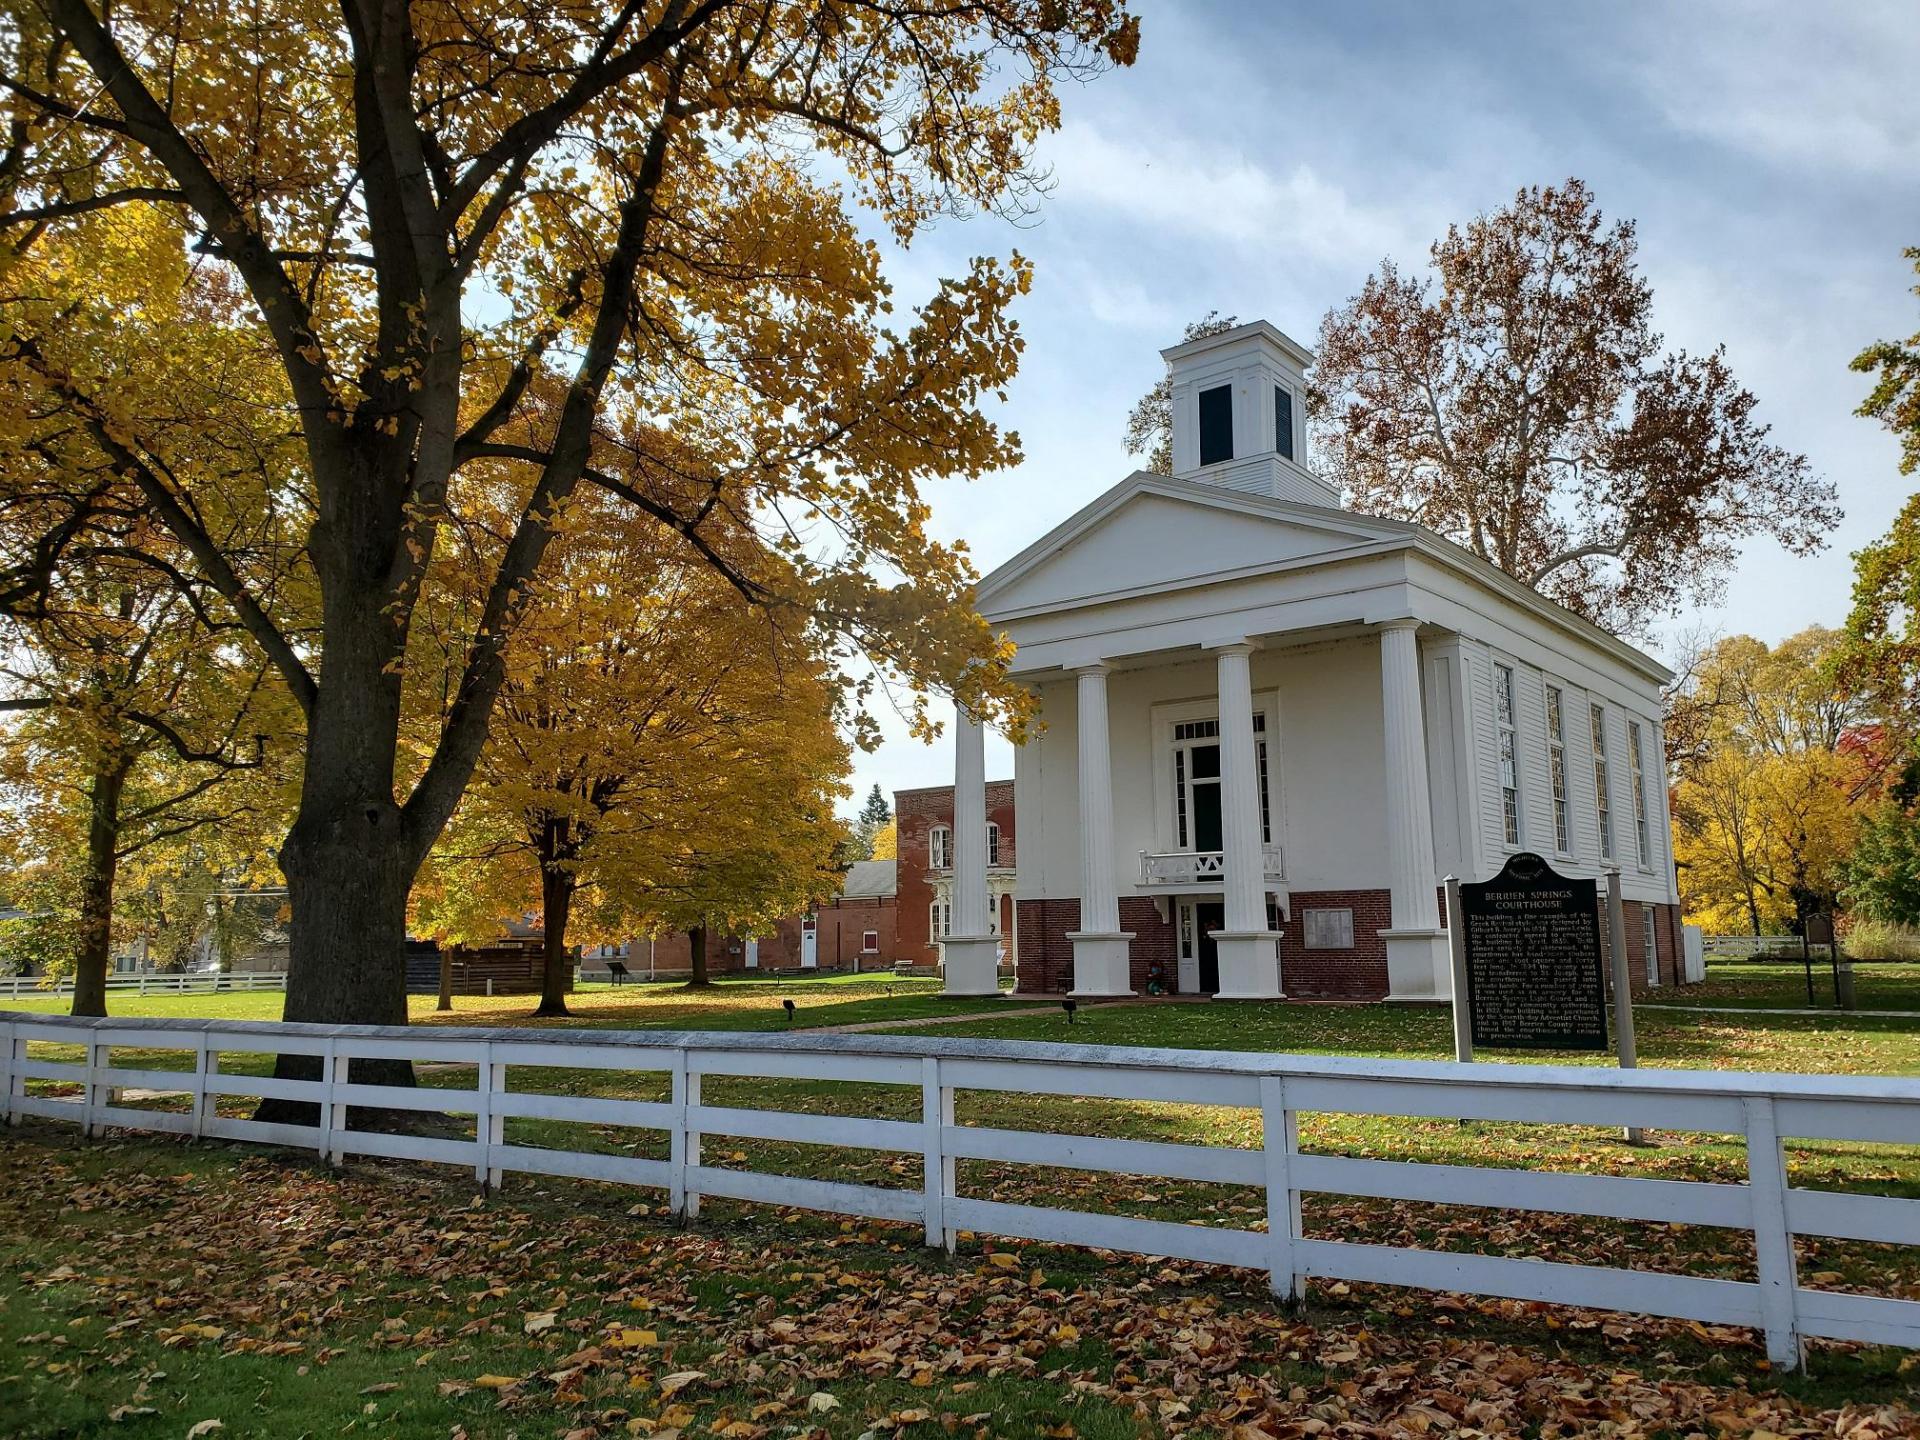 1839 Courthouse